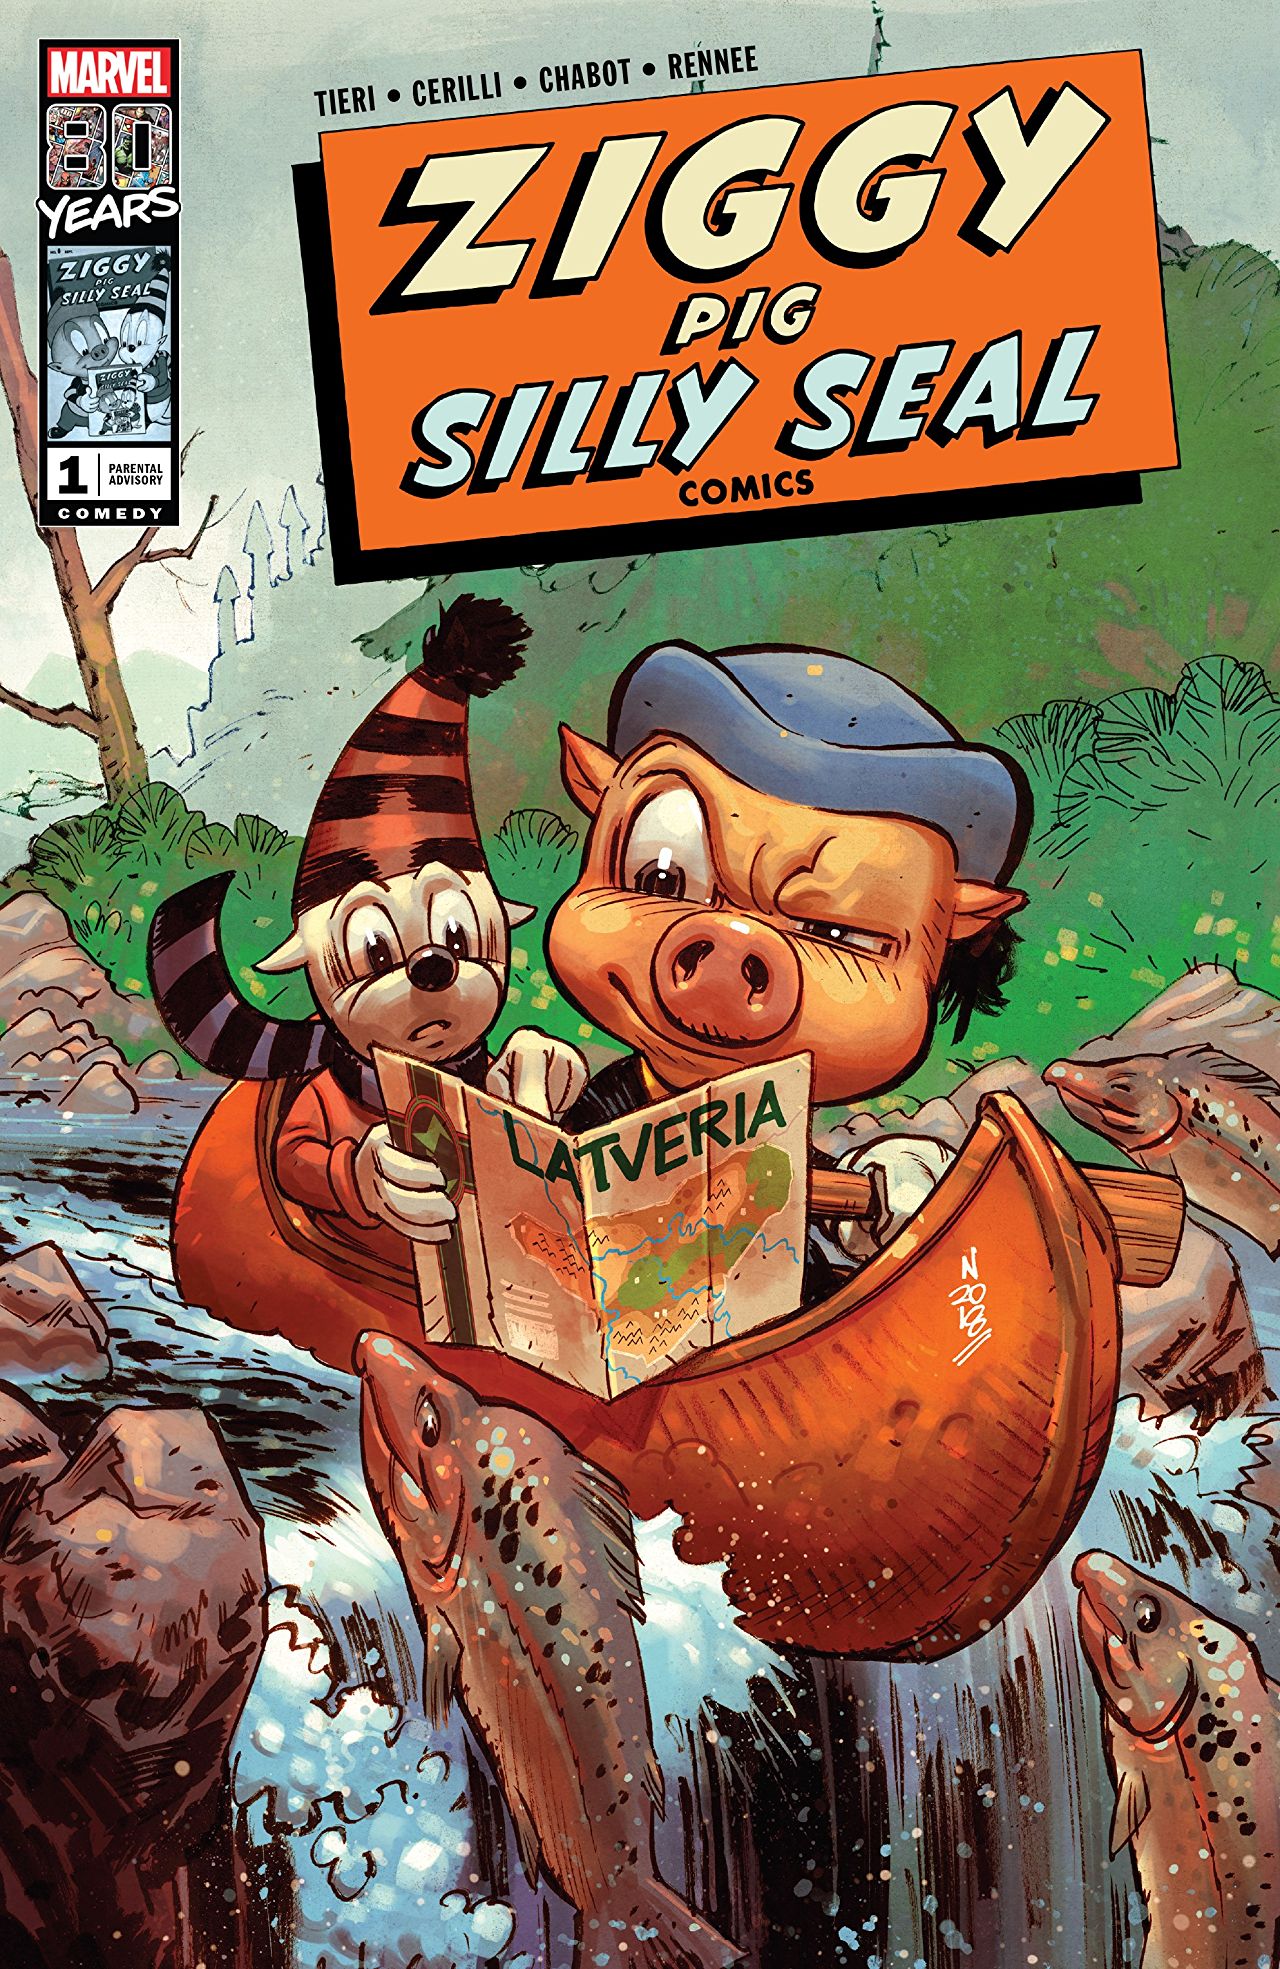 Marvel Preview: Ziggy Pig: Silly Seal Comics #1